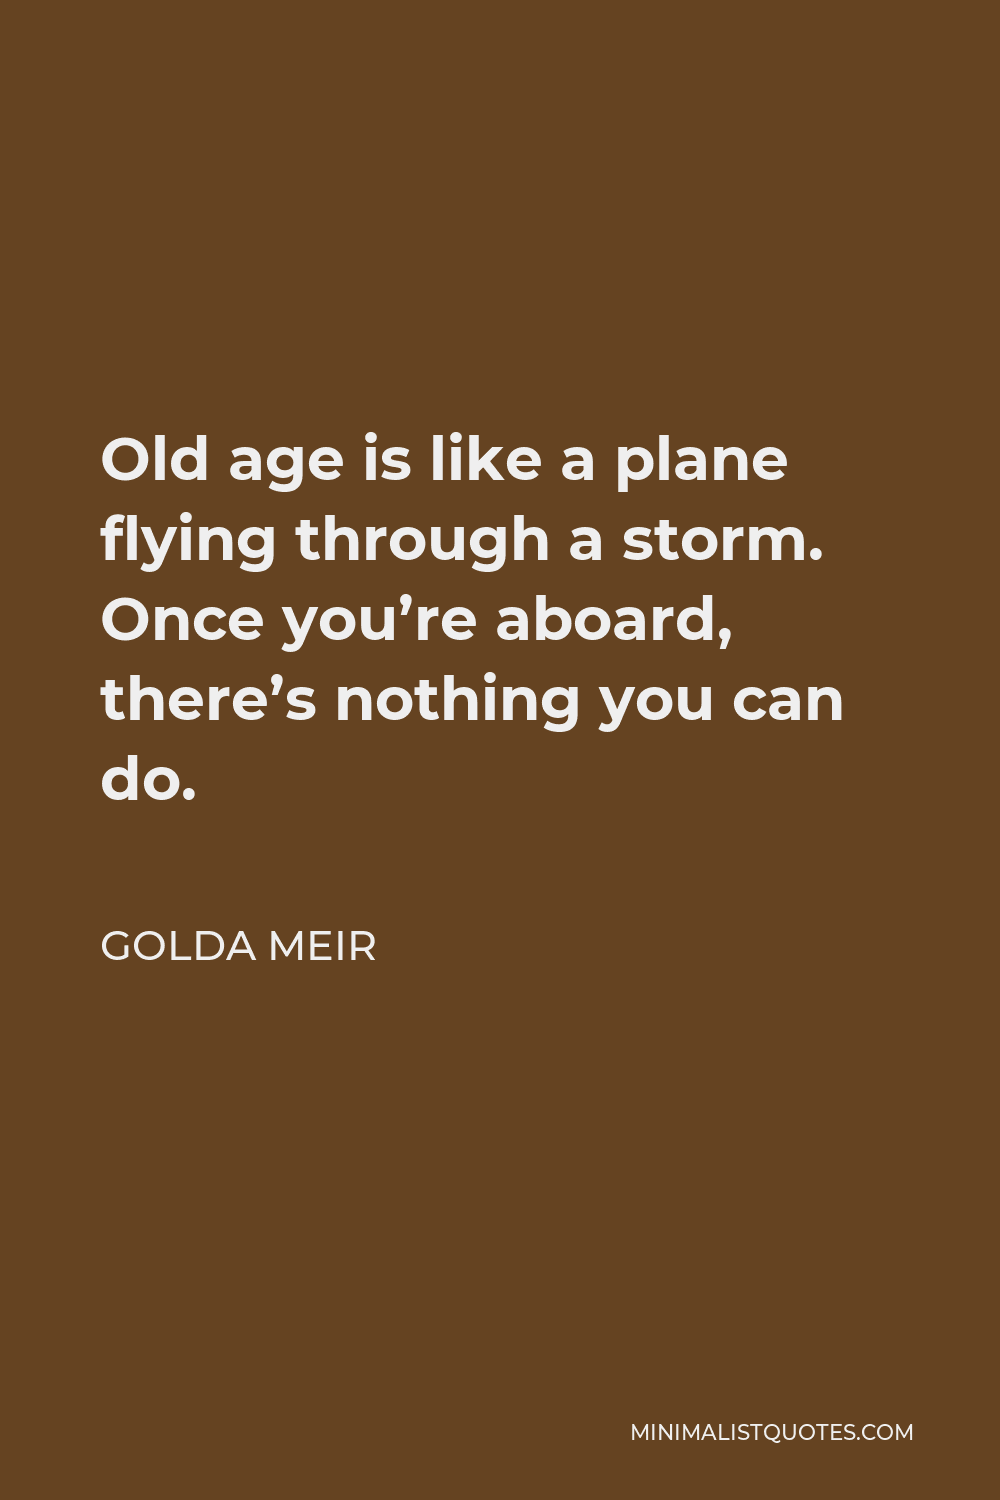 Golda Meir Quote - Old age is like a plane flying through a storm. Once you’re aboard, there’s nothing you can do.